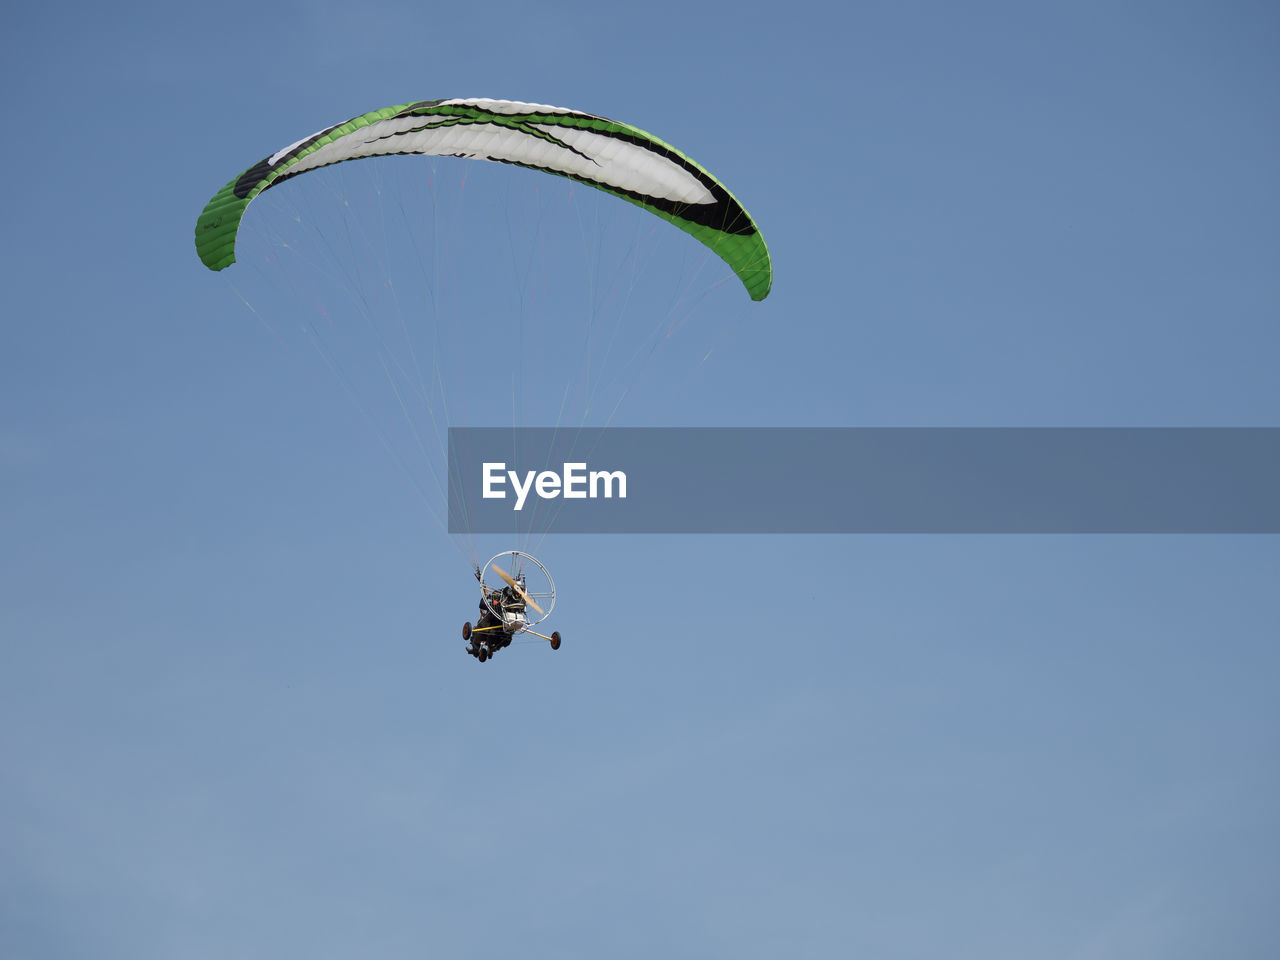 Low angle view of person motor paragliding in clear sky